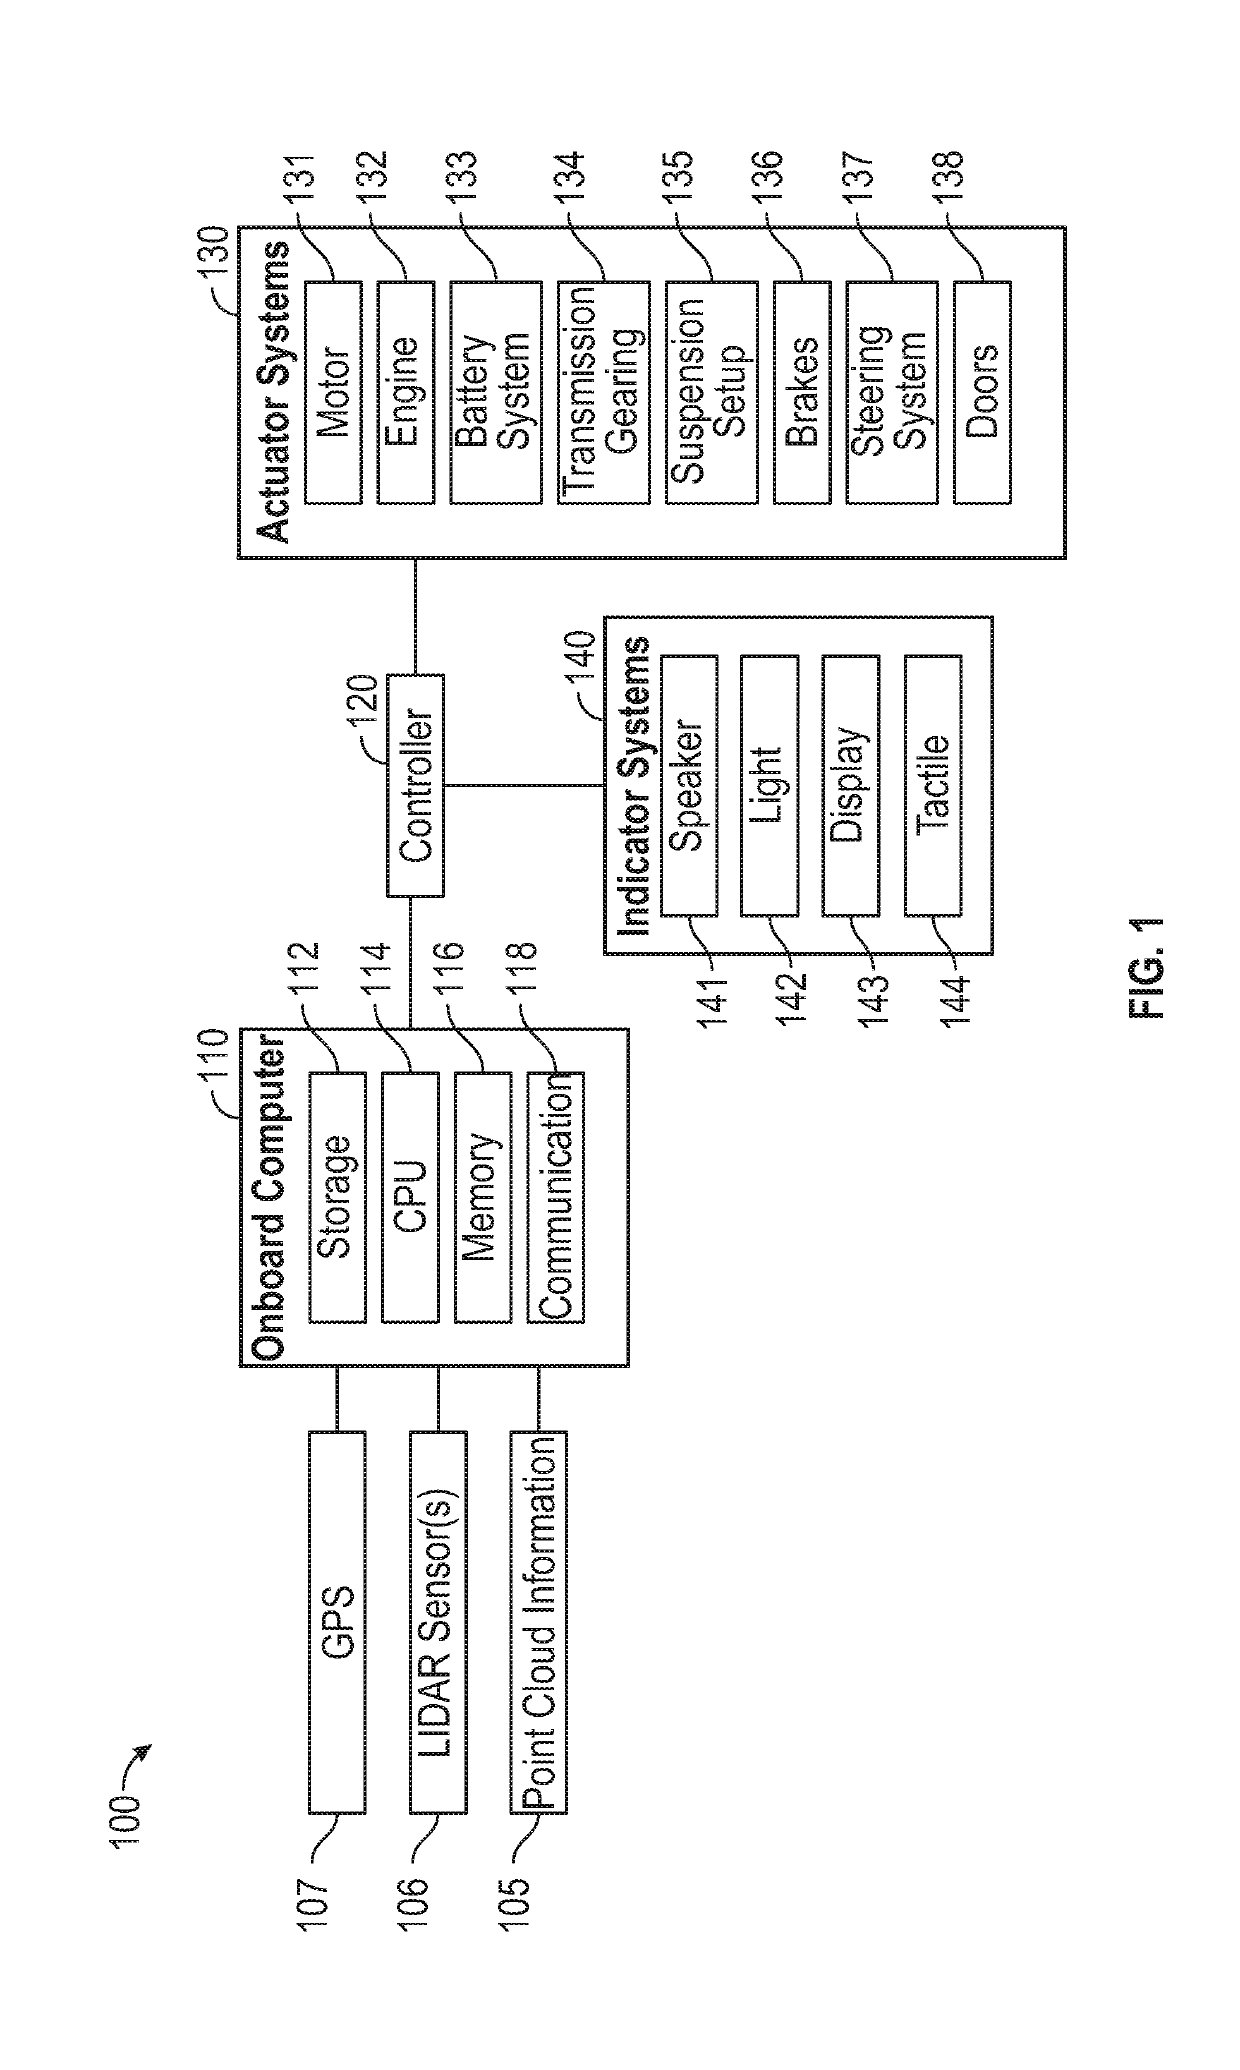 System and method for lidar-based vehicular localization relating to autonomous navigation